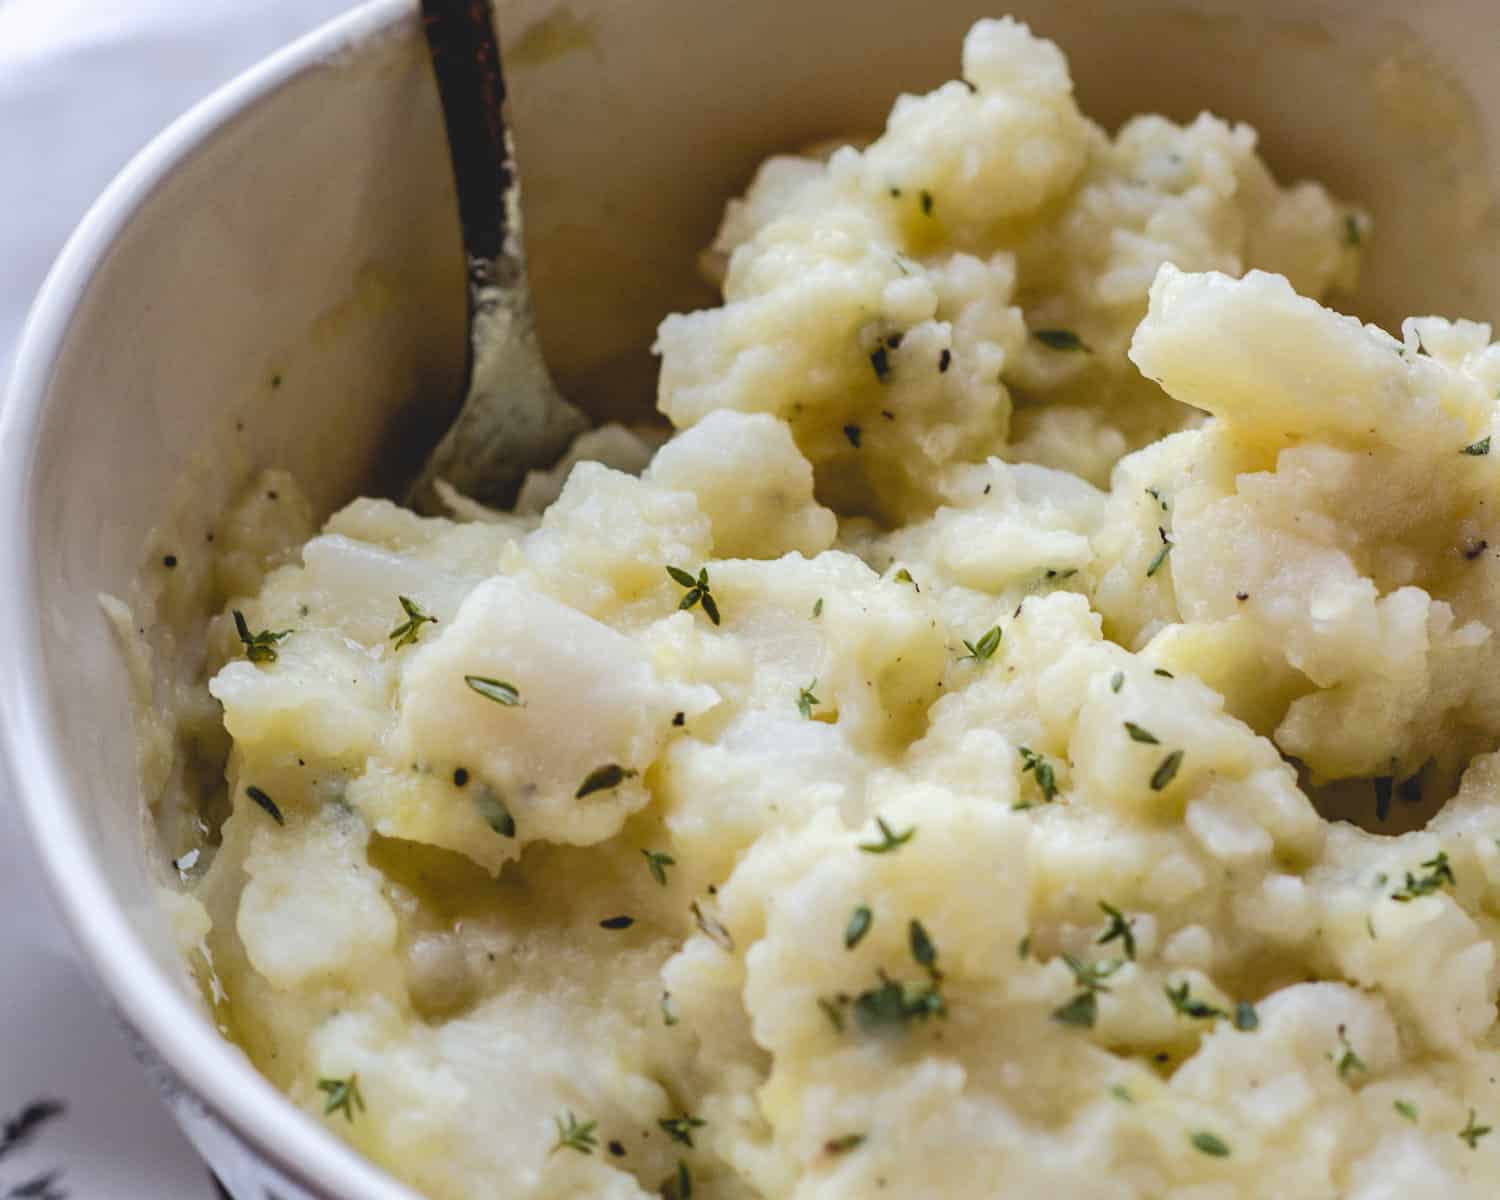 Bowl of buttery mashed turnips and potatoes